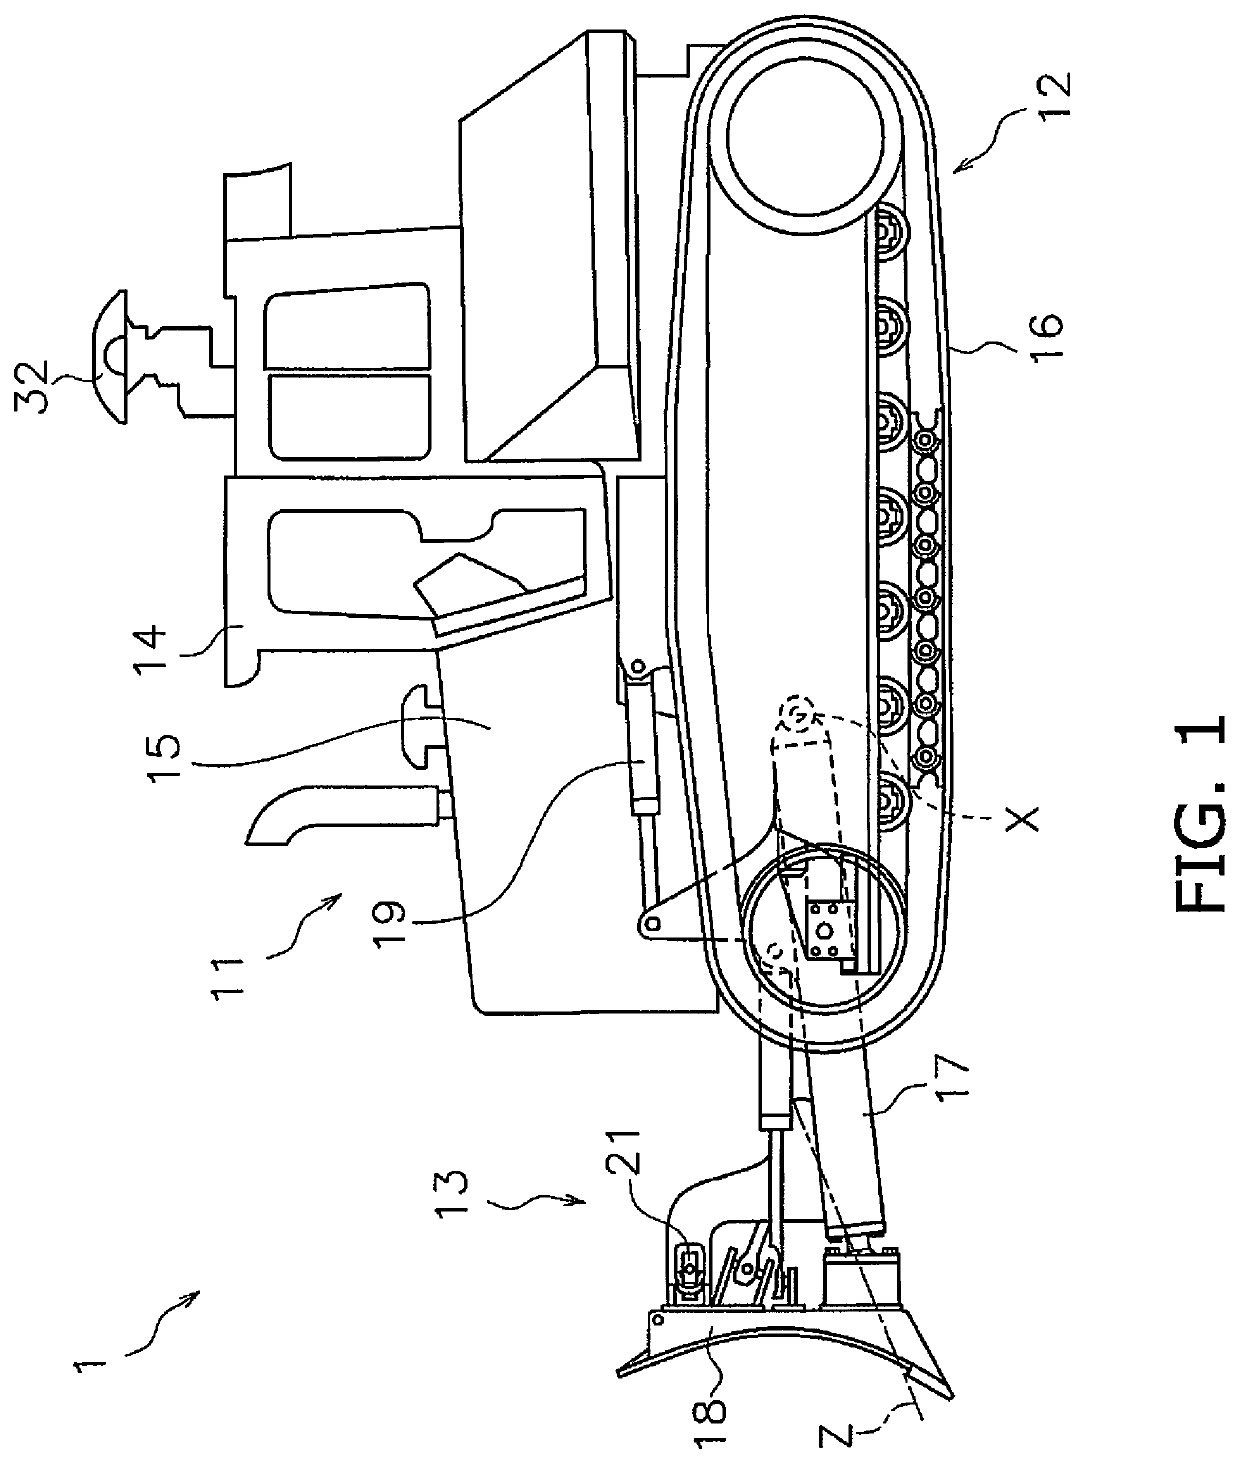 Control system for work vehicle, method, and work vehicle